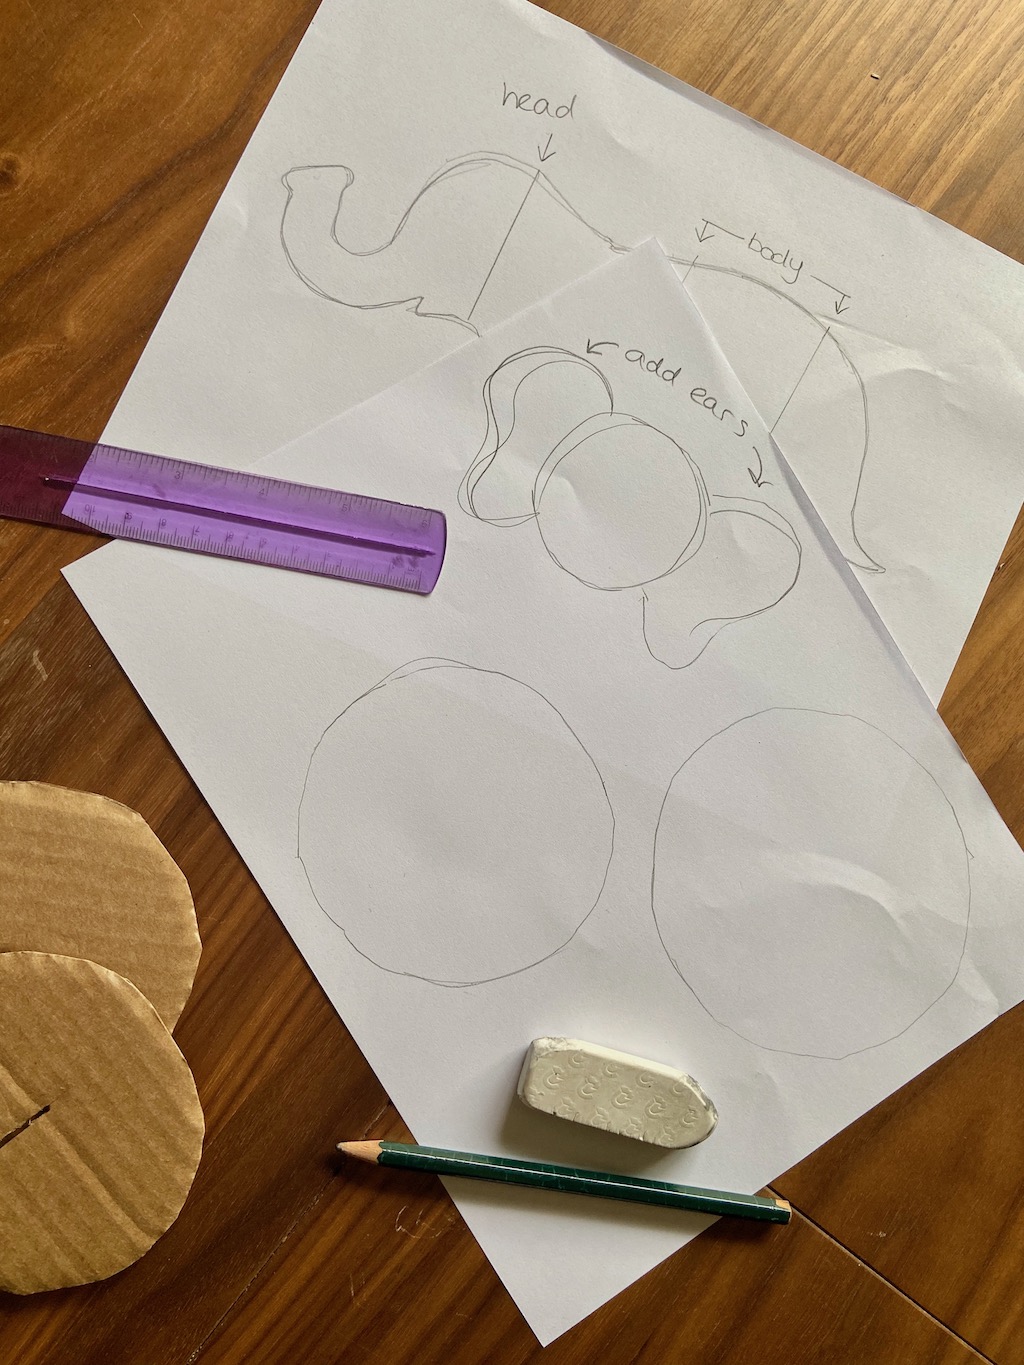 For each measurement, draw a circle with an equal diameter. You will have at least 3 circles: 2 for the body, 1 for the head. Draw ears on the smallest circle for the elephant’s head.